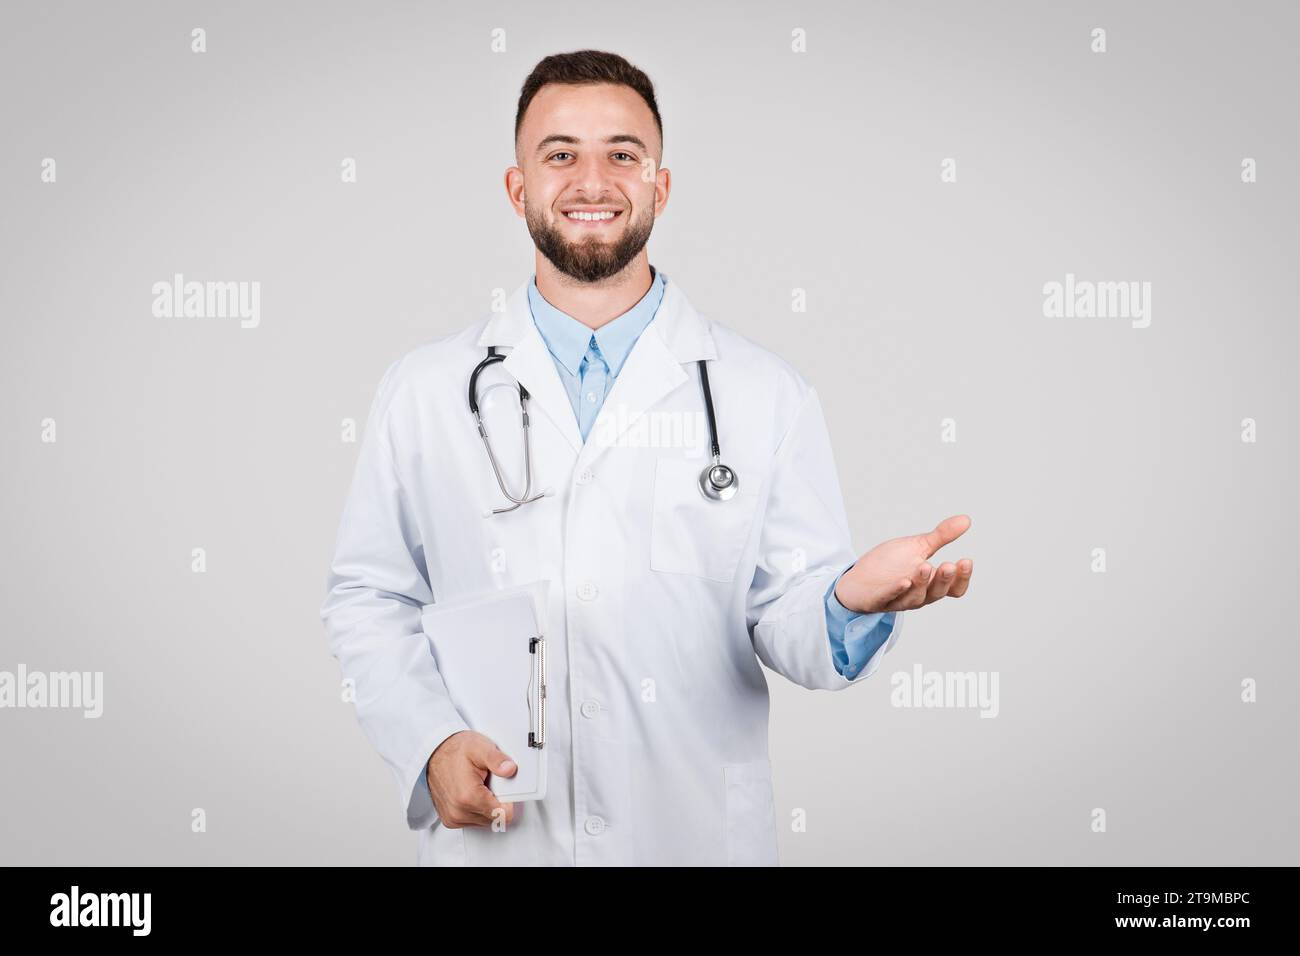 European male doctor holding clipboard and gesturing Stock Photo